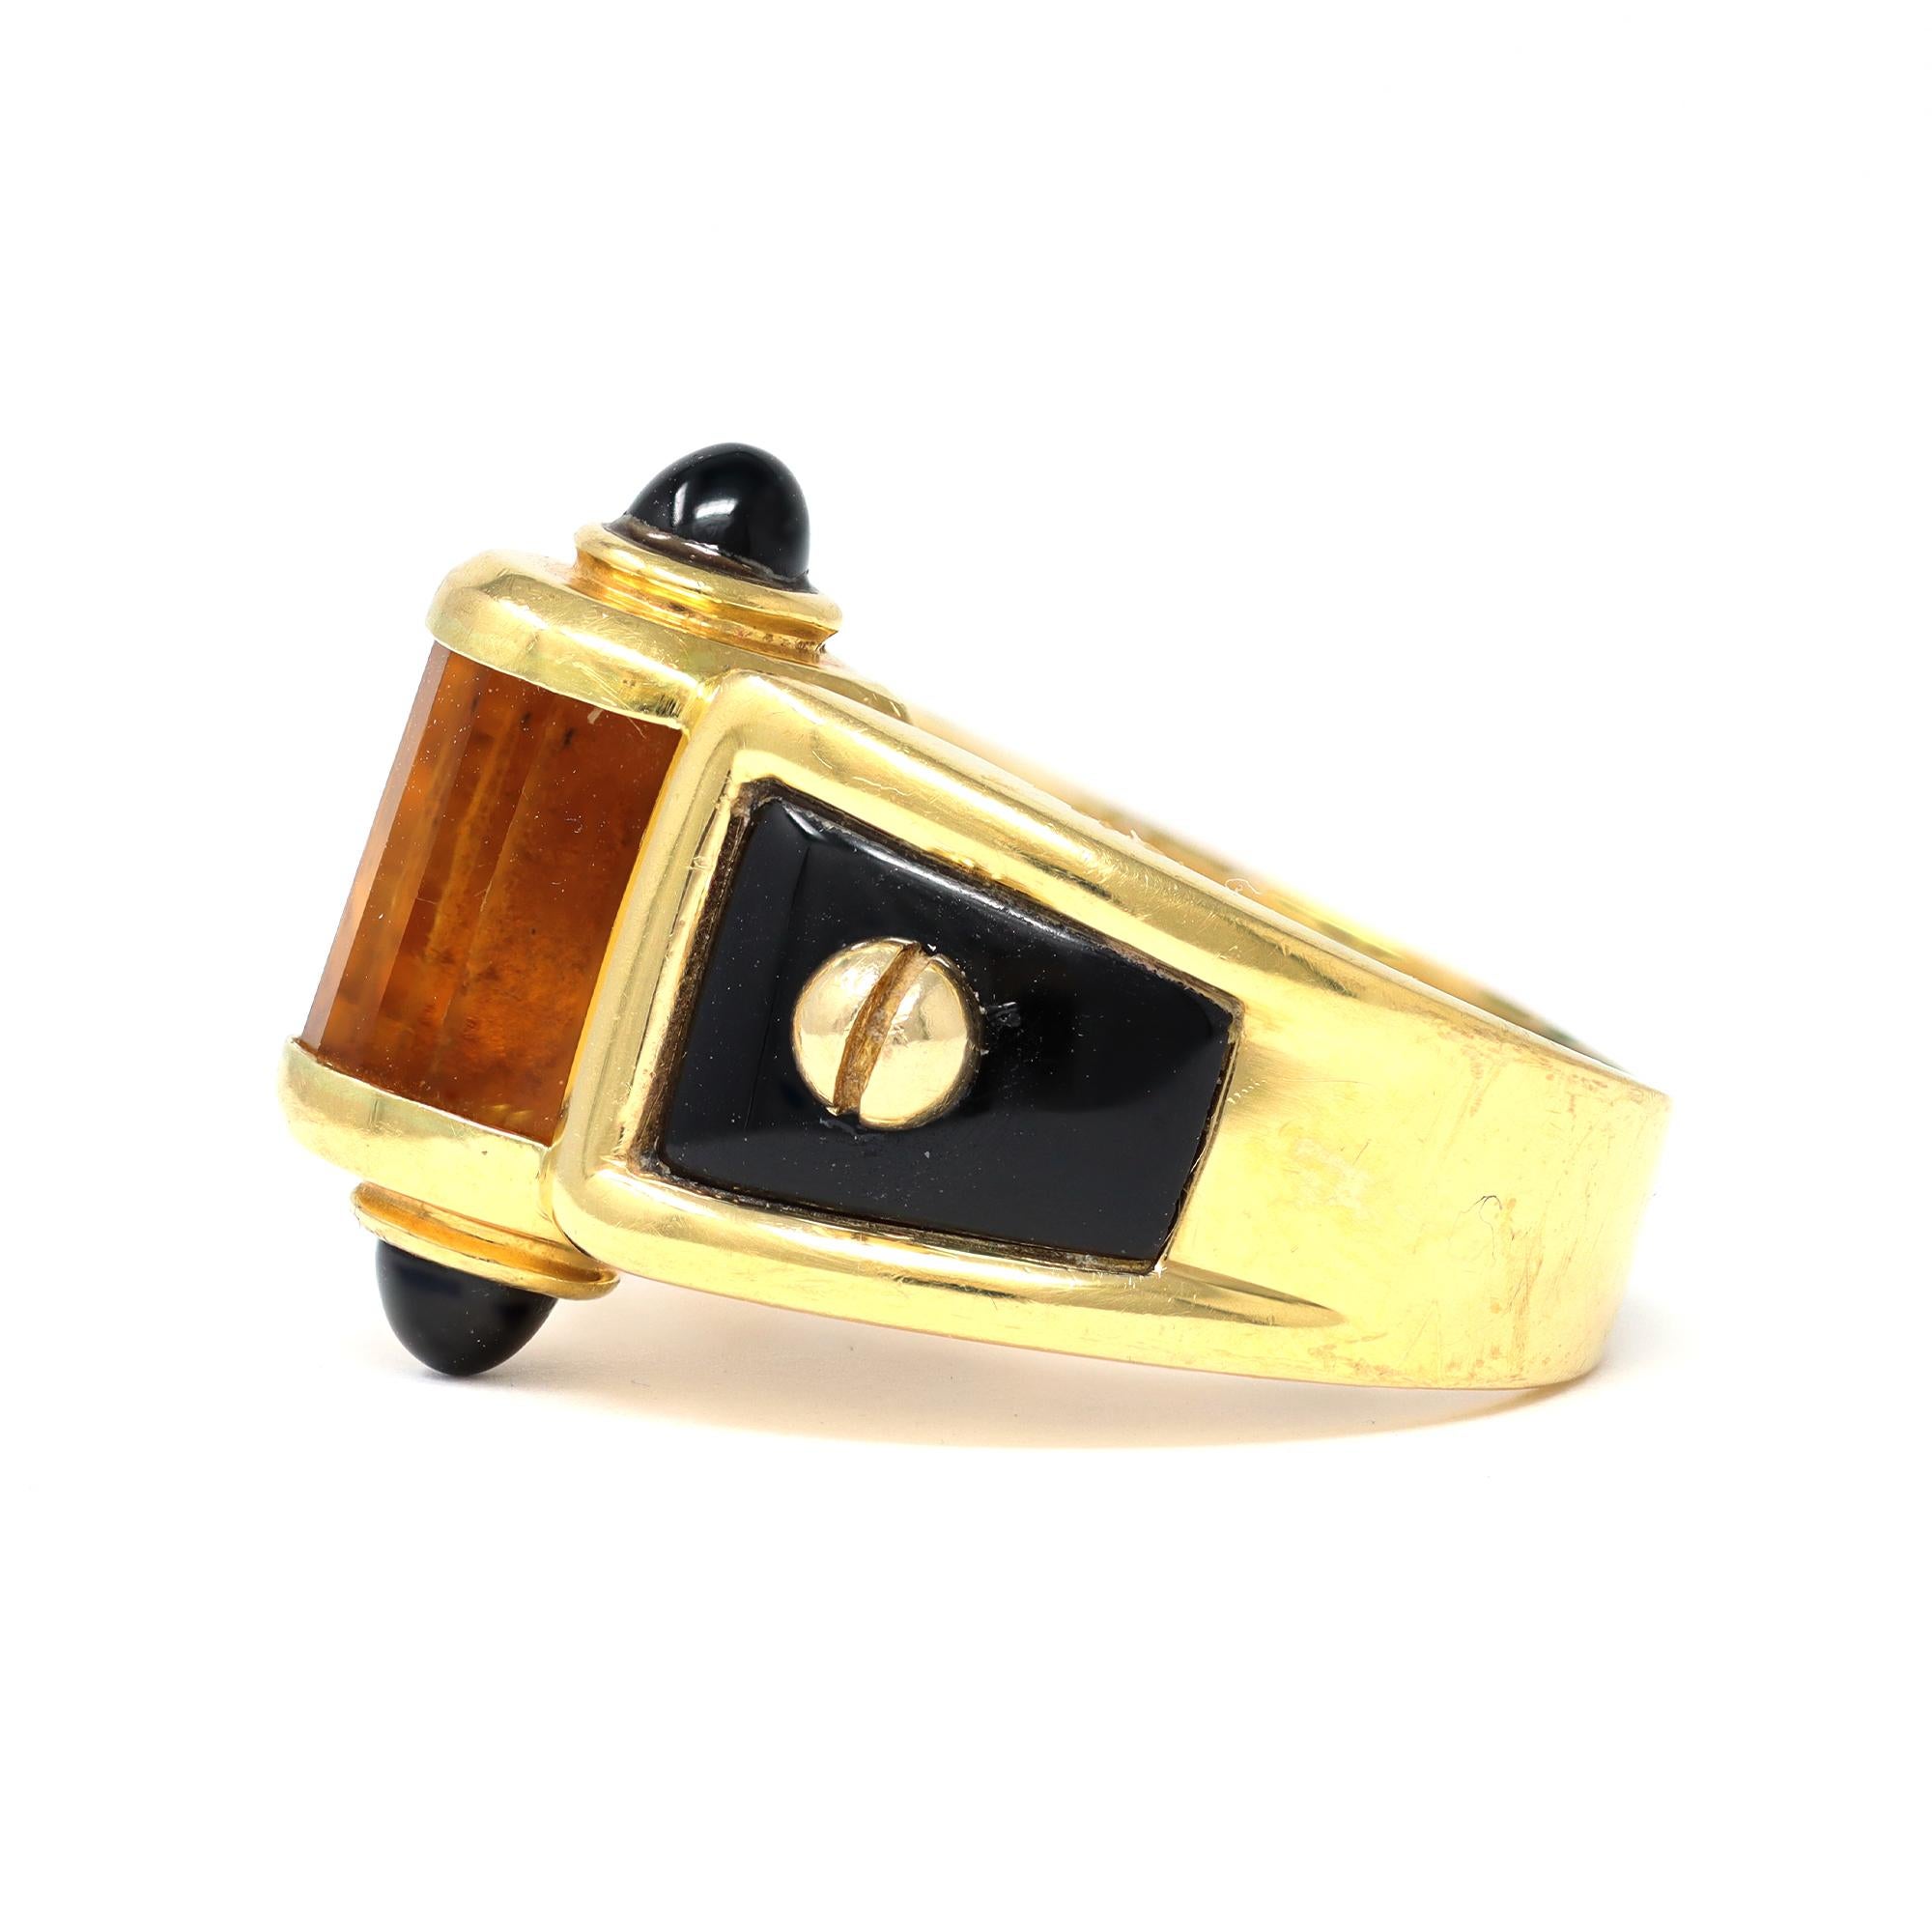 A one of a kind coctail ring circa 1980 featuring a fancy cut citrine and onyx parts, set in 18 karat yellow gold. The gross weight of the ring is 15.4 grams. The ring fits a size 8. It measures 0.77